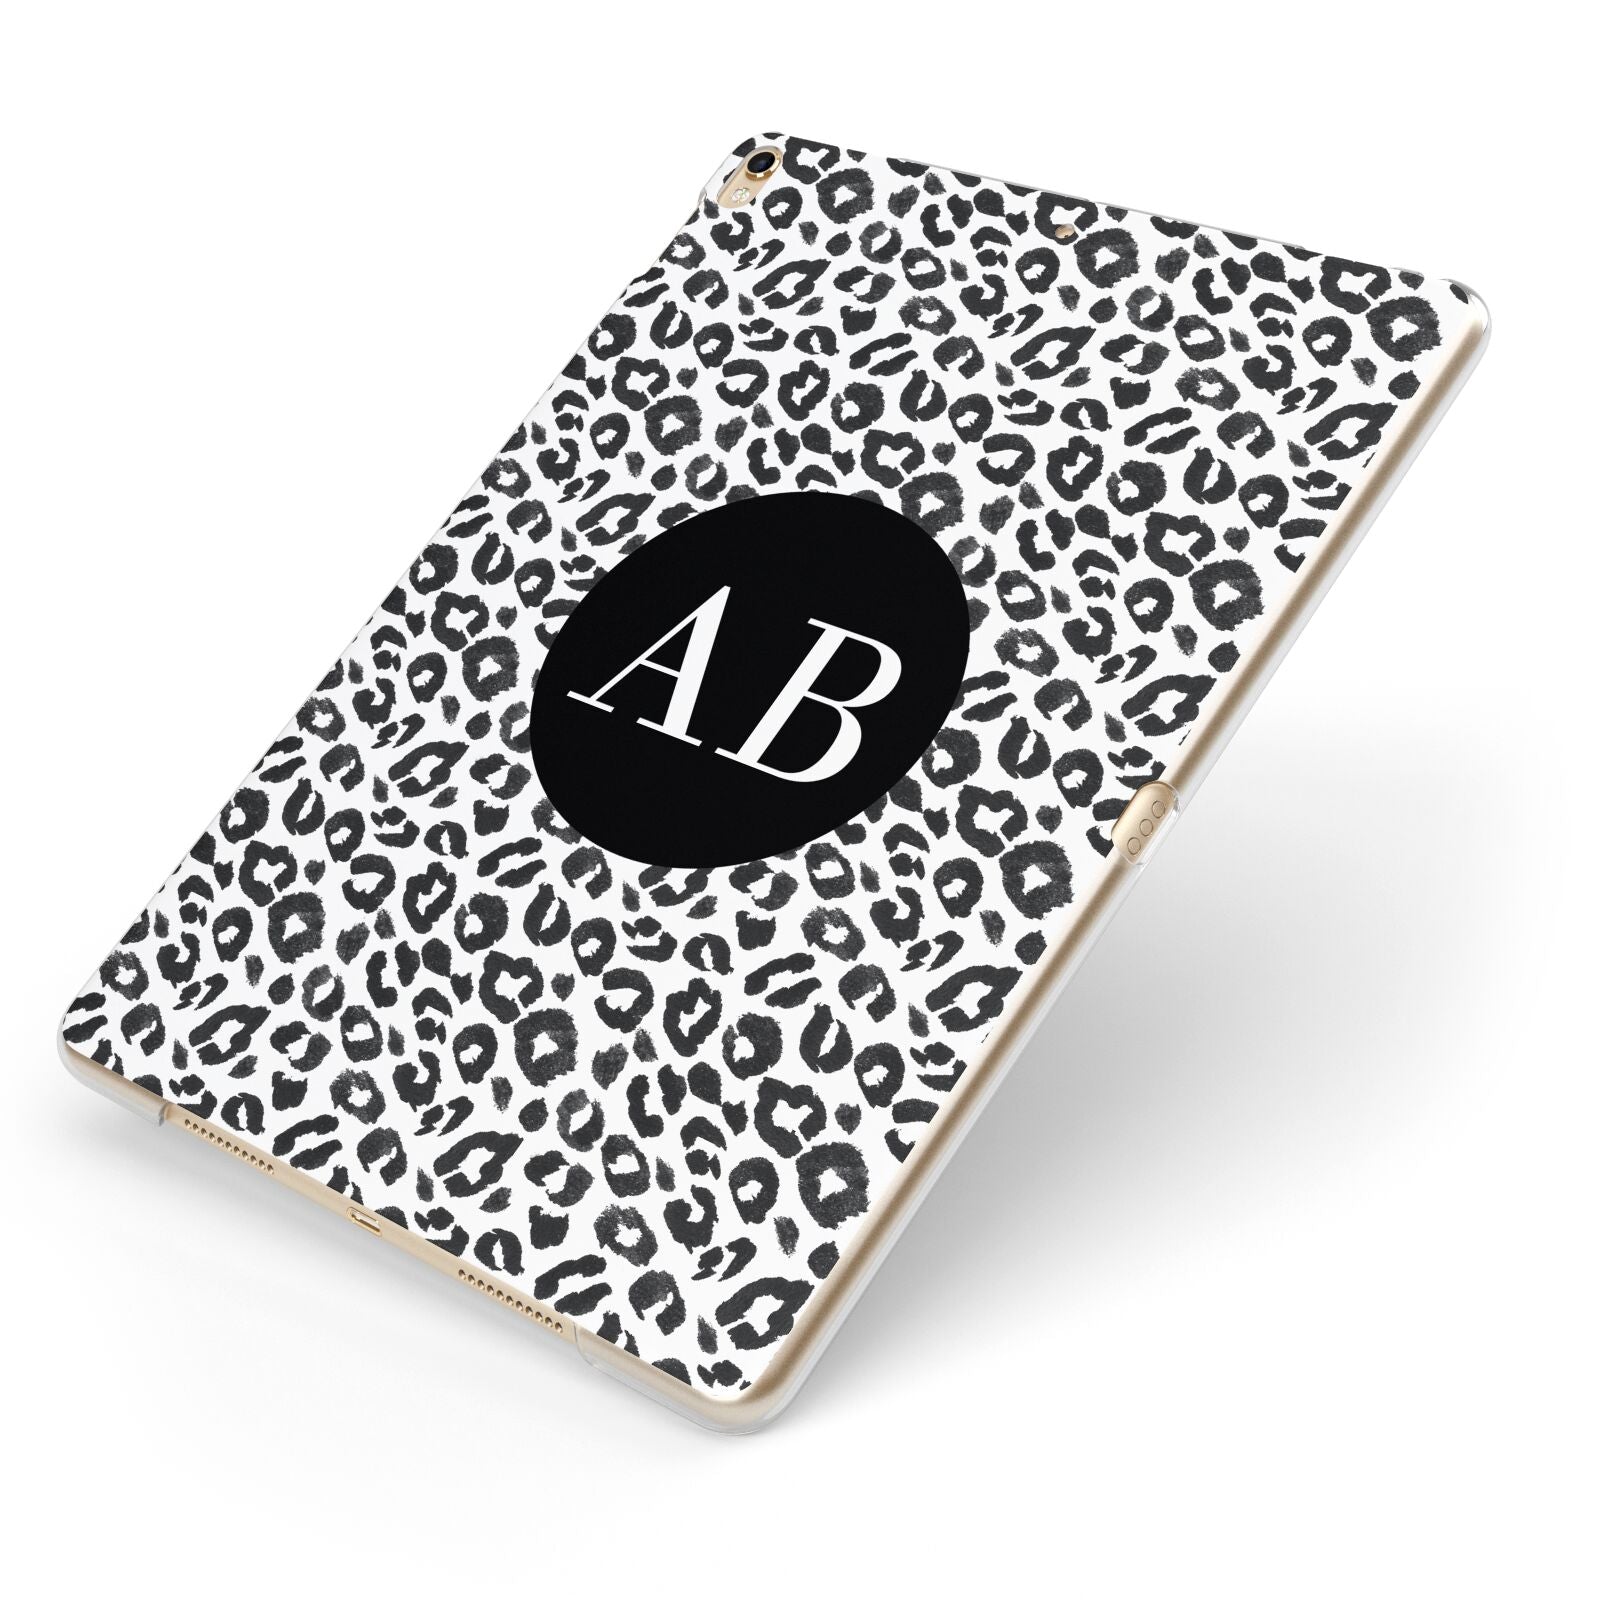 Leopard Print Black and White Apple iPad Case on Gold iPad Side View